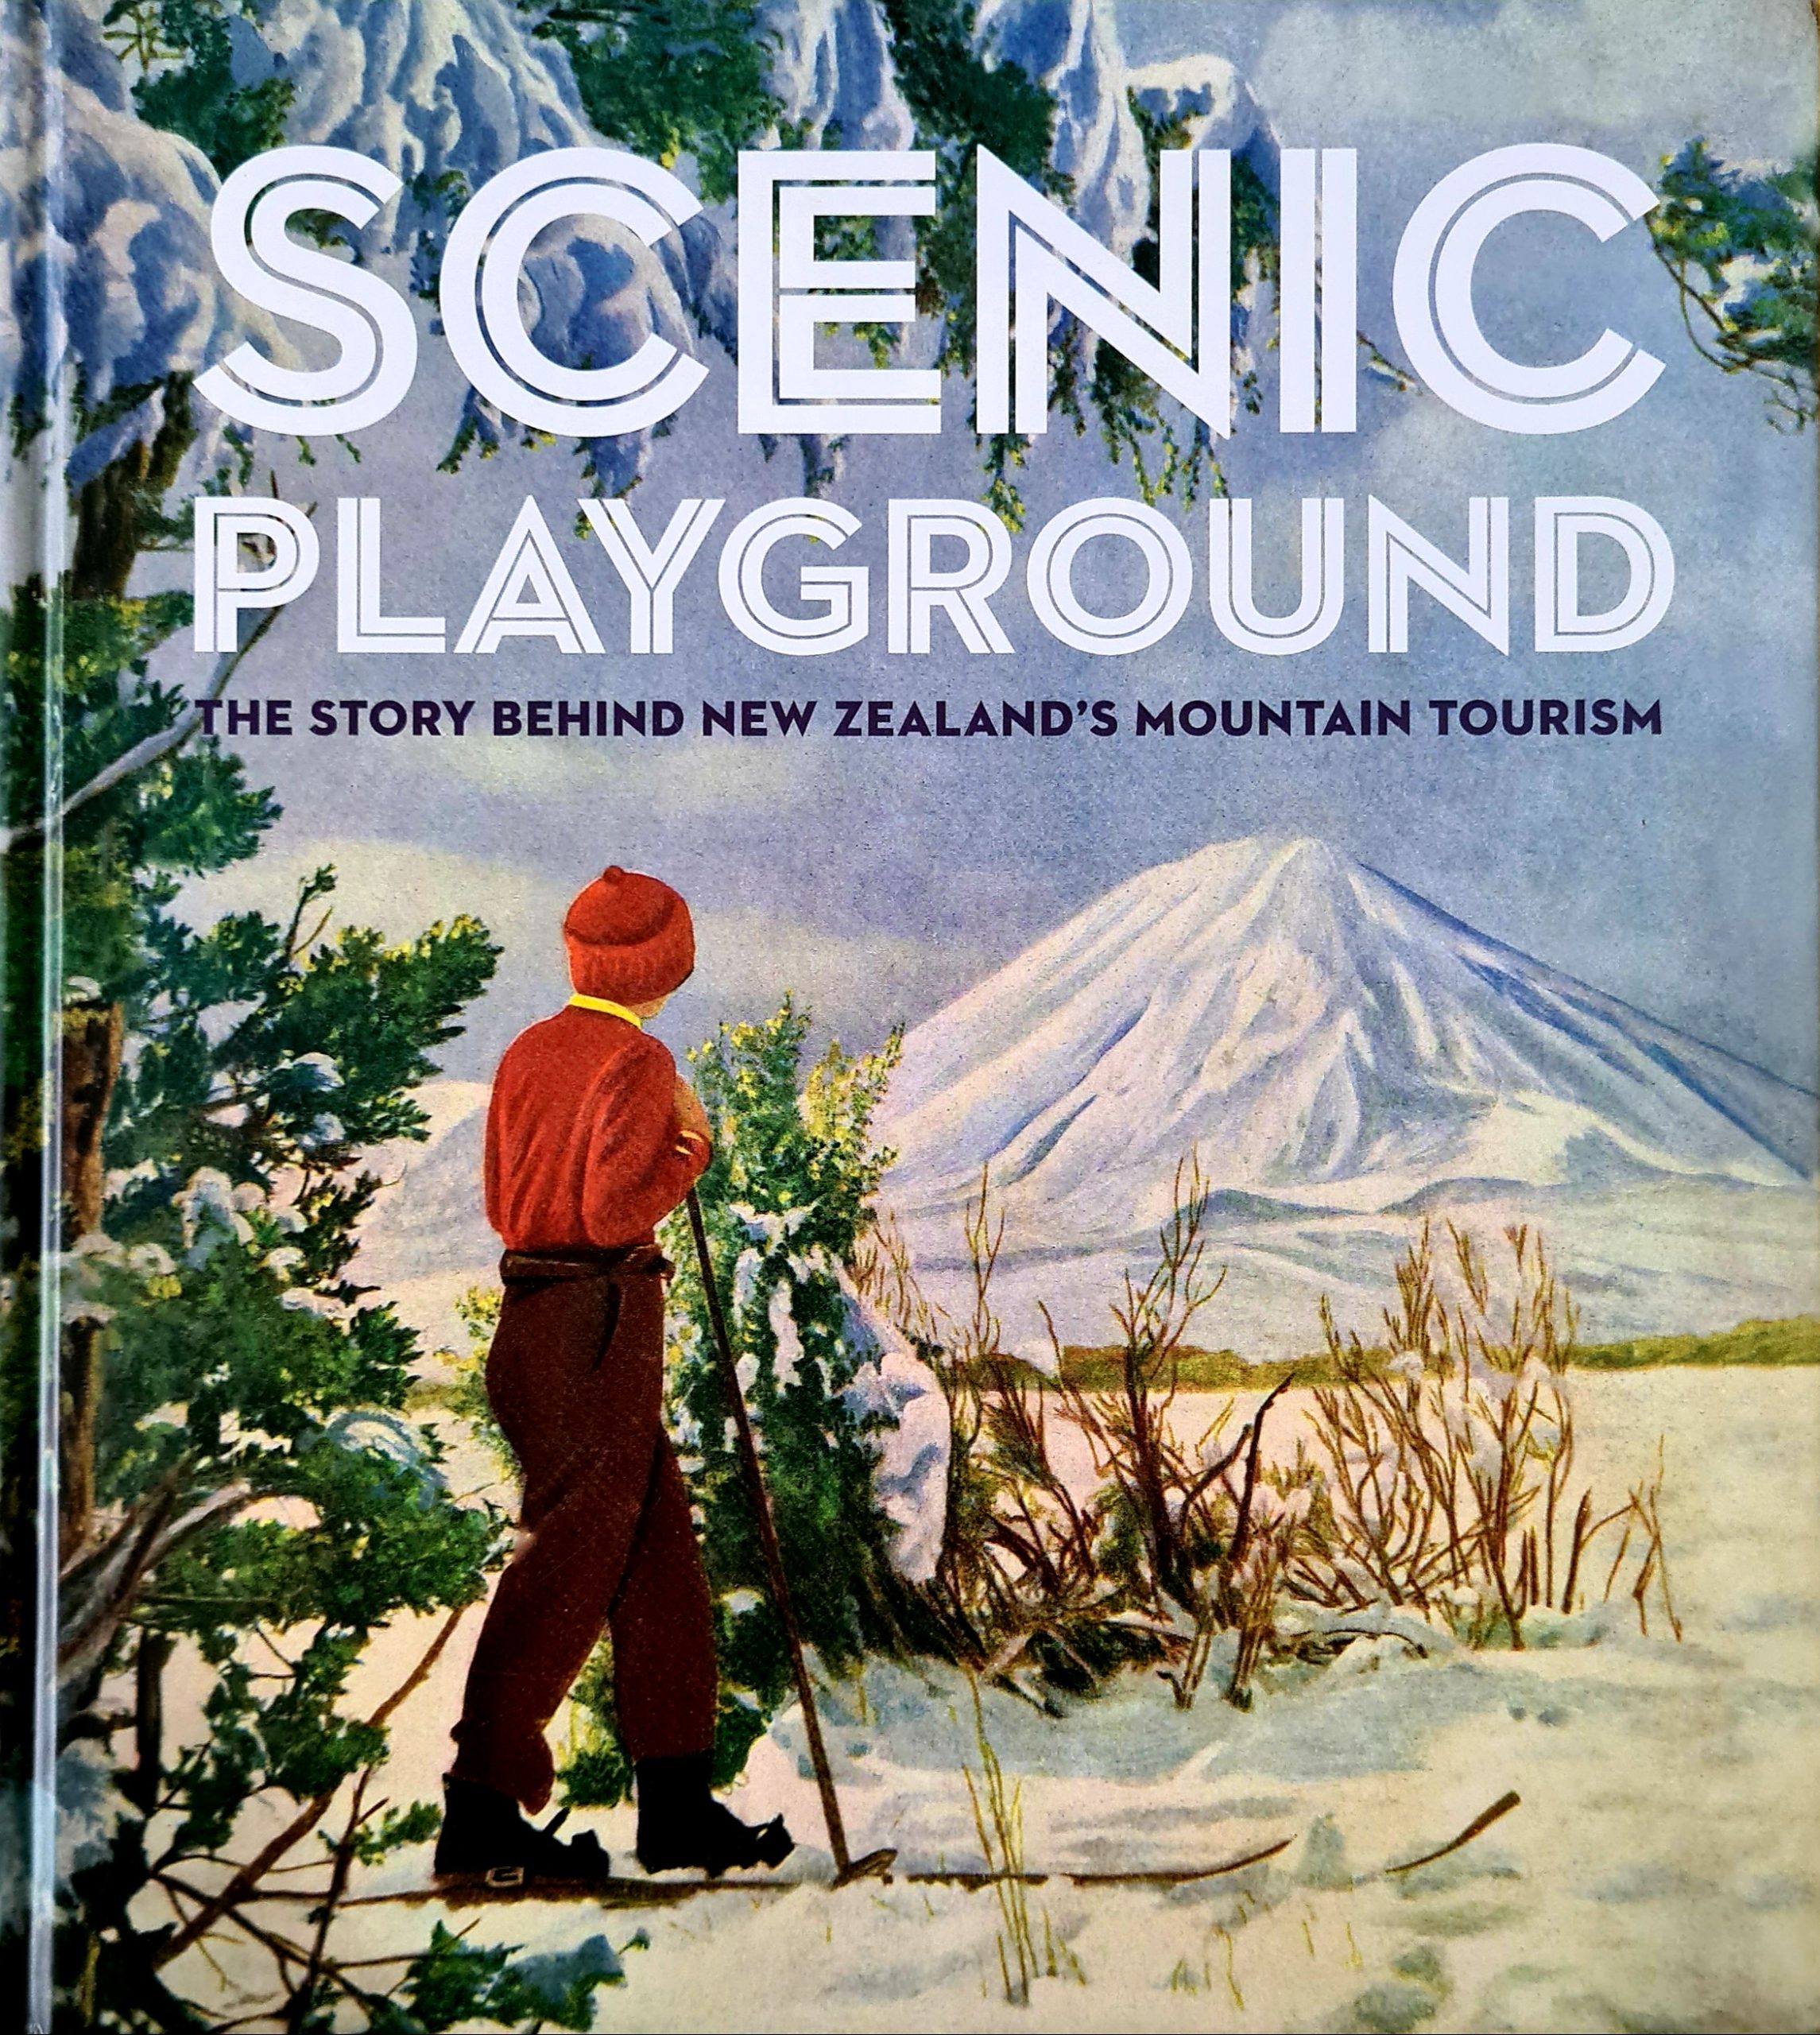 Book Review: Scenic Playground – The story behind New Zealand’s mountain tourism